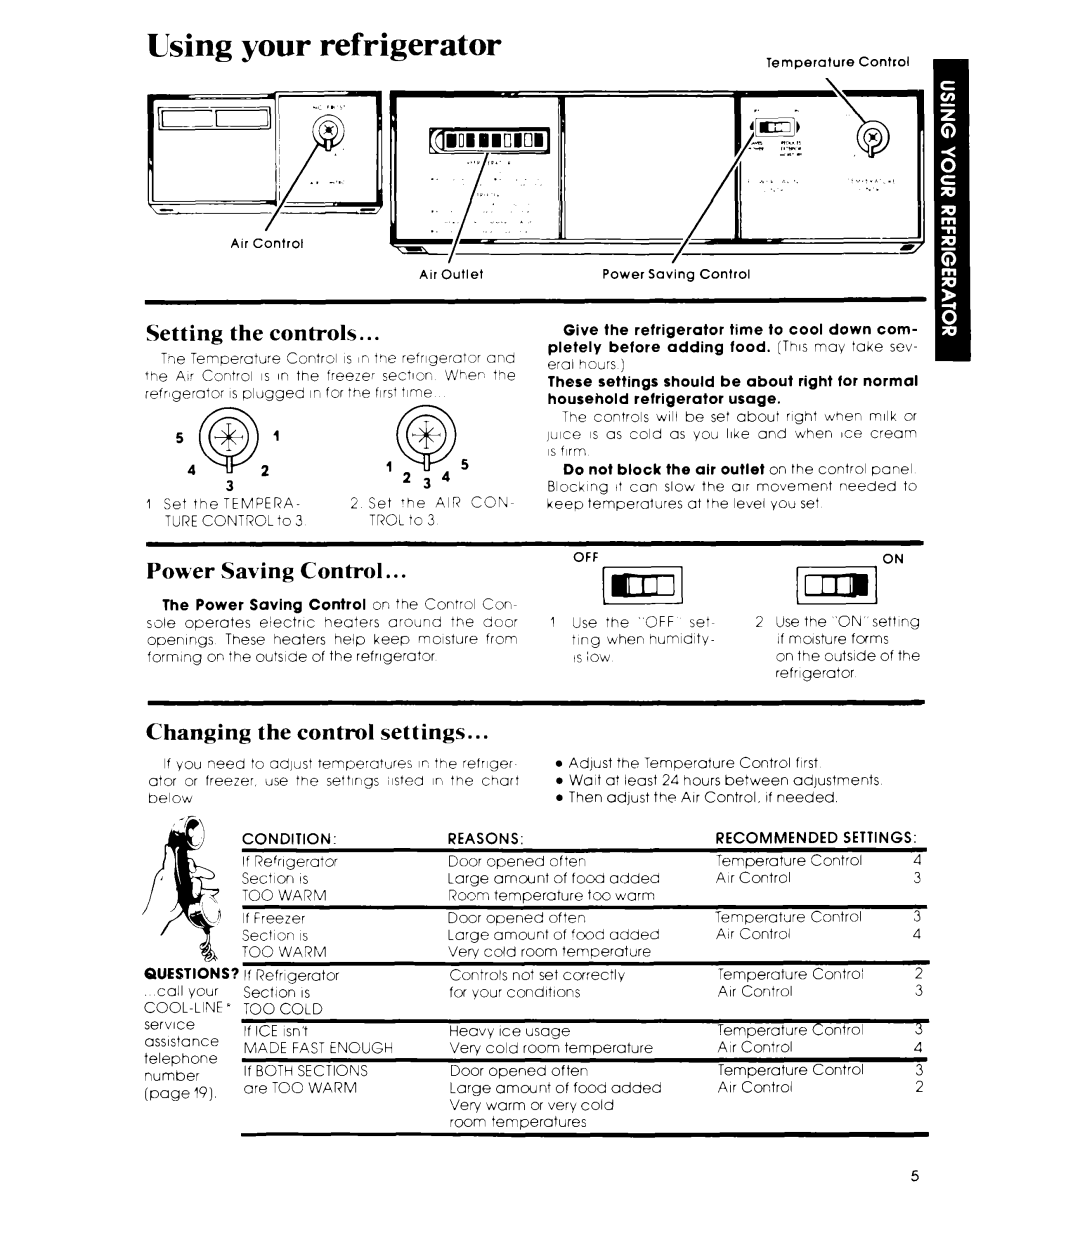 Whirlpool ED26SS manual Using your refrigerator, Setting, controls, Power Saving Control, Changing the control settings 